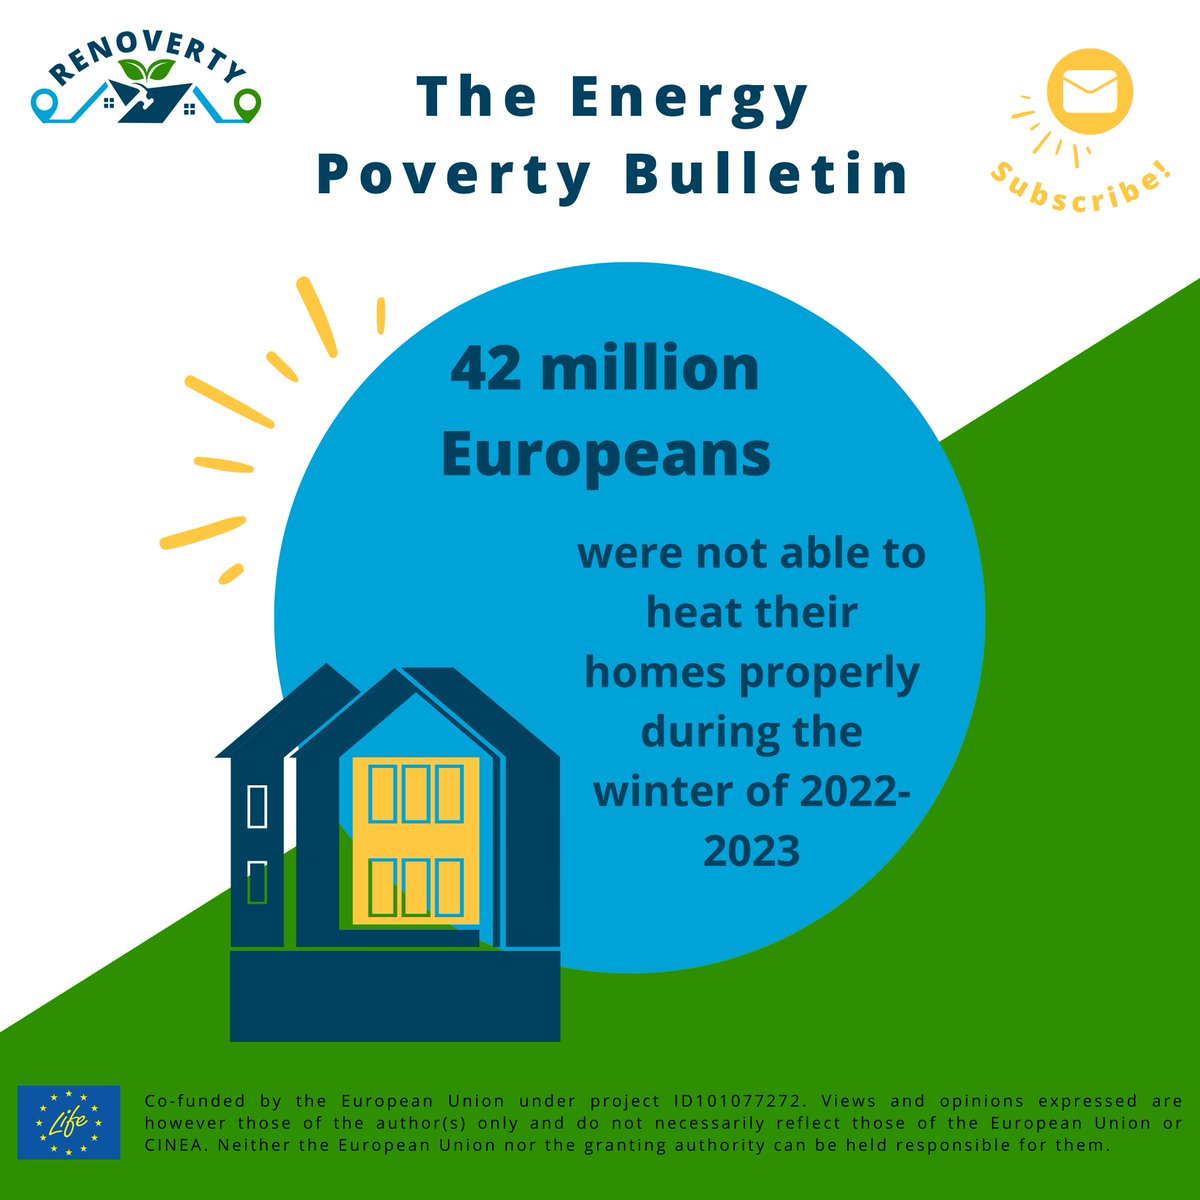 ✉️ Have you read our newsletter on #energypoverty? 

👉 Read it here: mailchi.mp/58bdebd2ee69/t…

💙 Subscribe for the next edition here: ieecp.us21.list-manage.com/subscribe?u=47…